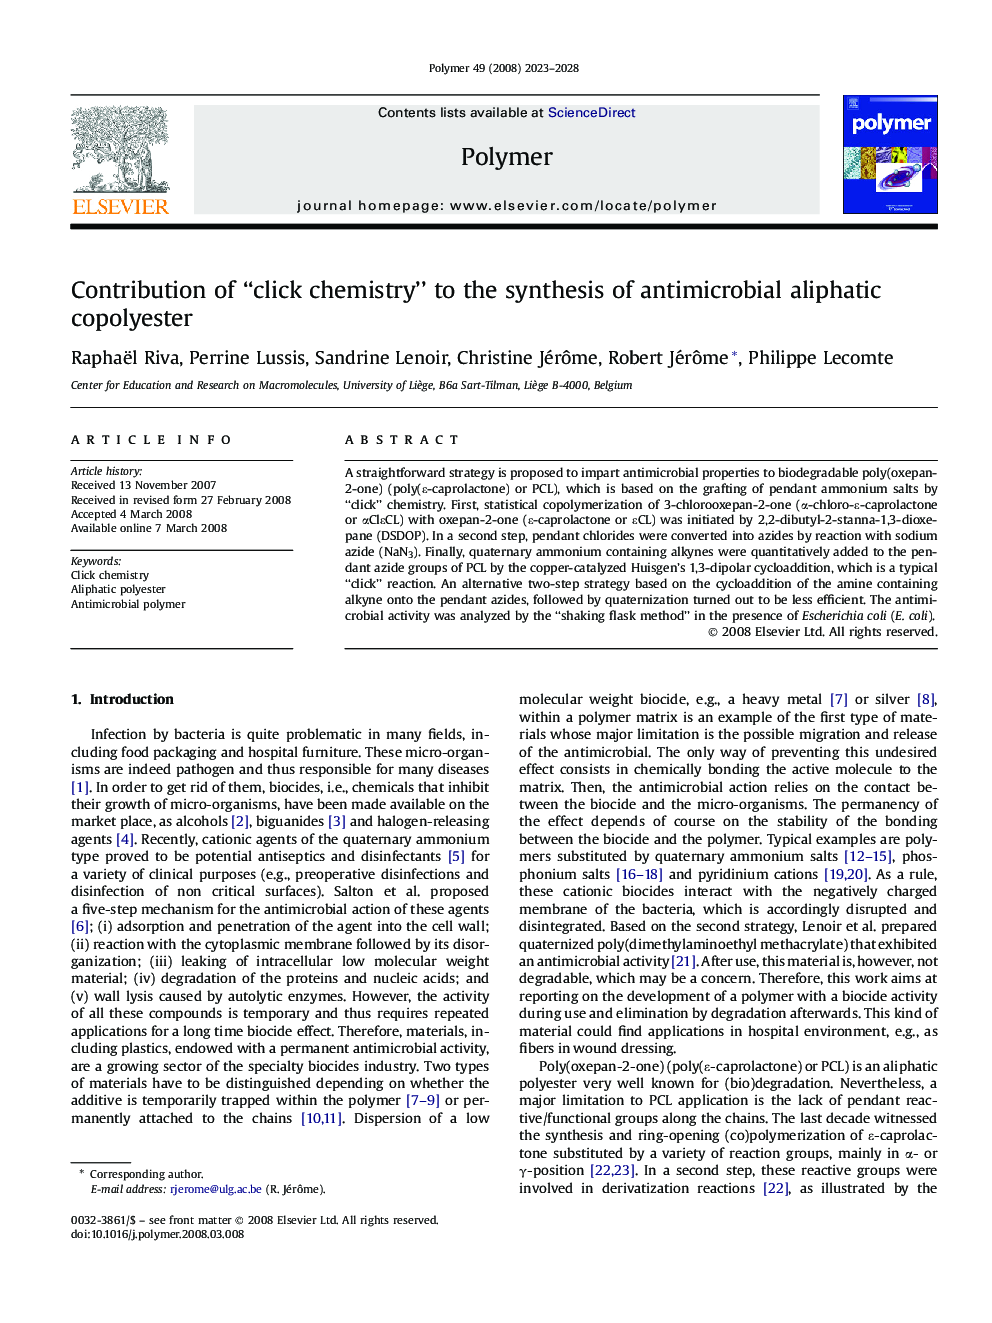 Contribution of “click chemistry” to the synthesis of antimicrobial aliphatic copolyester